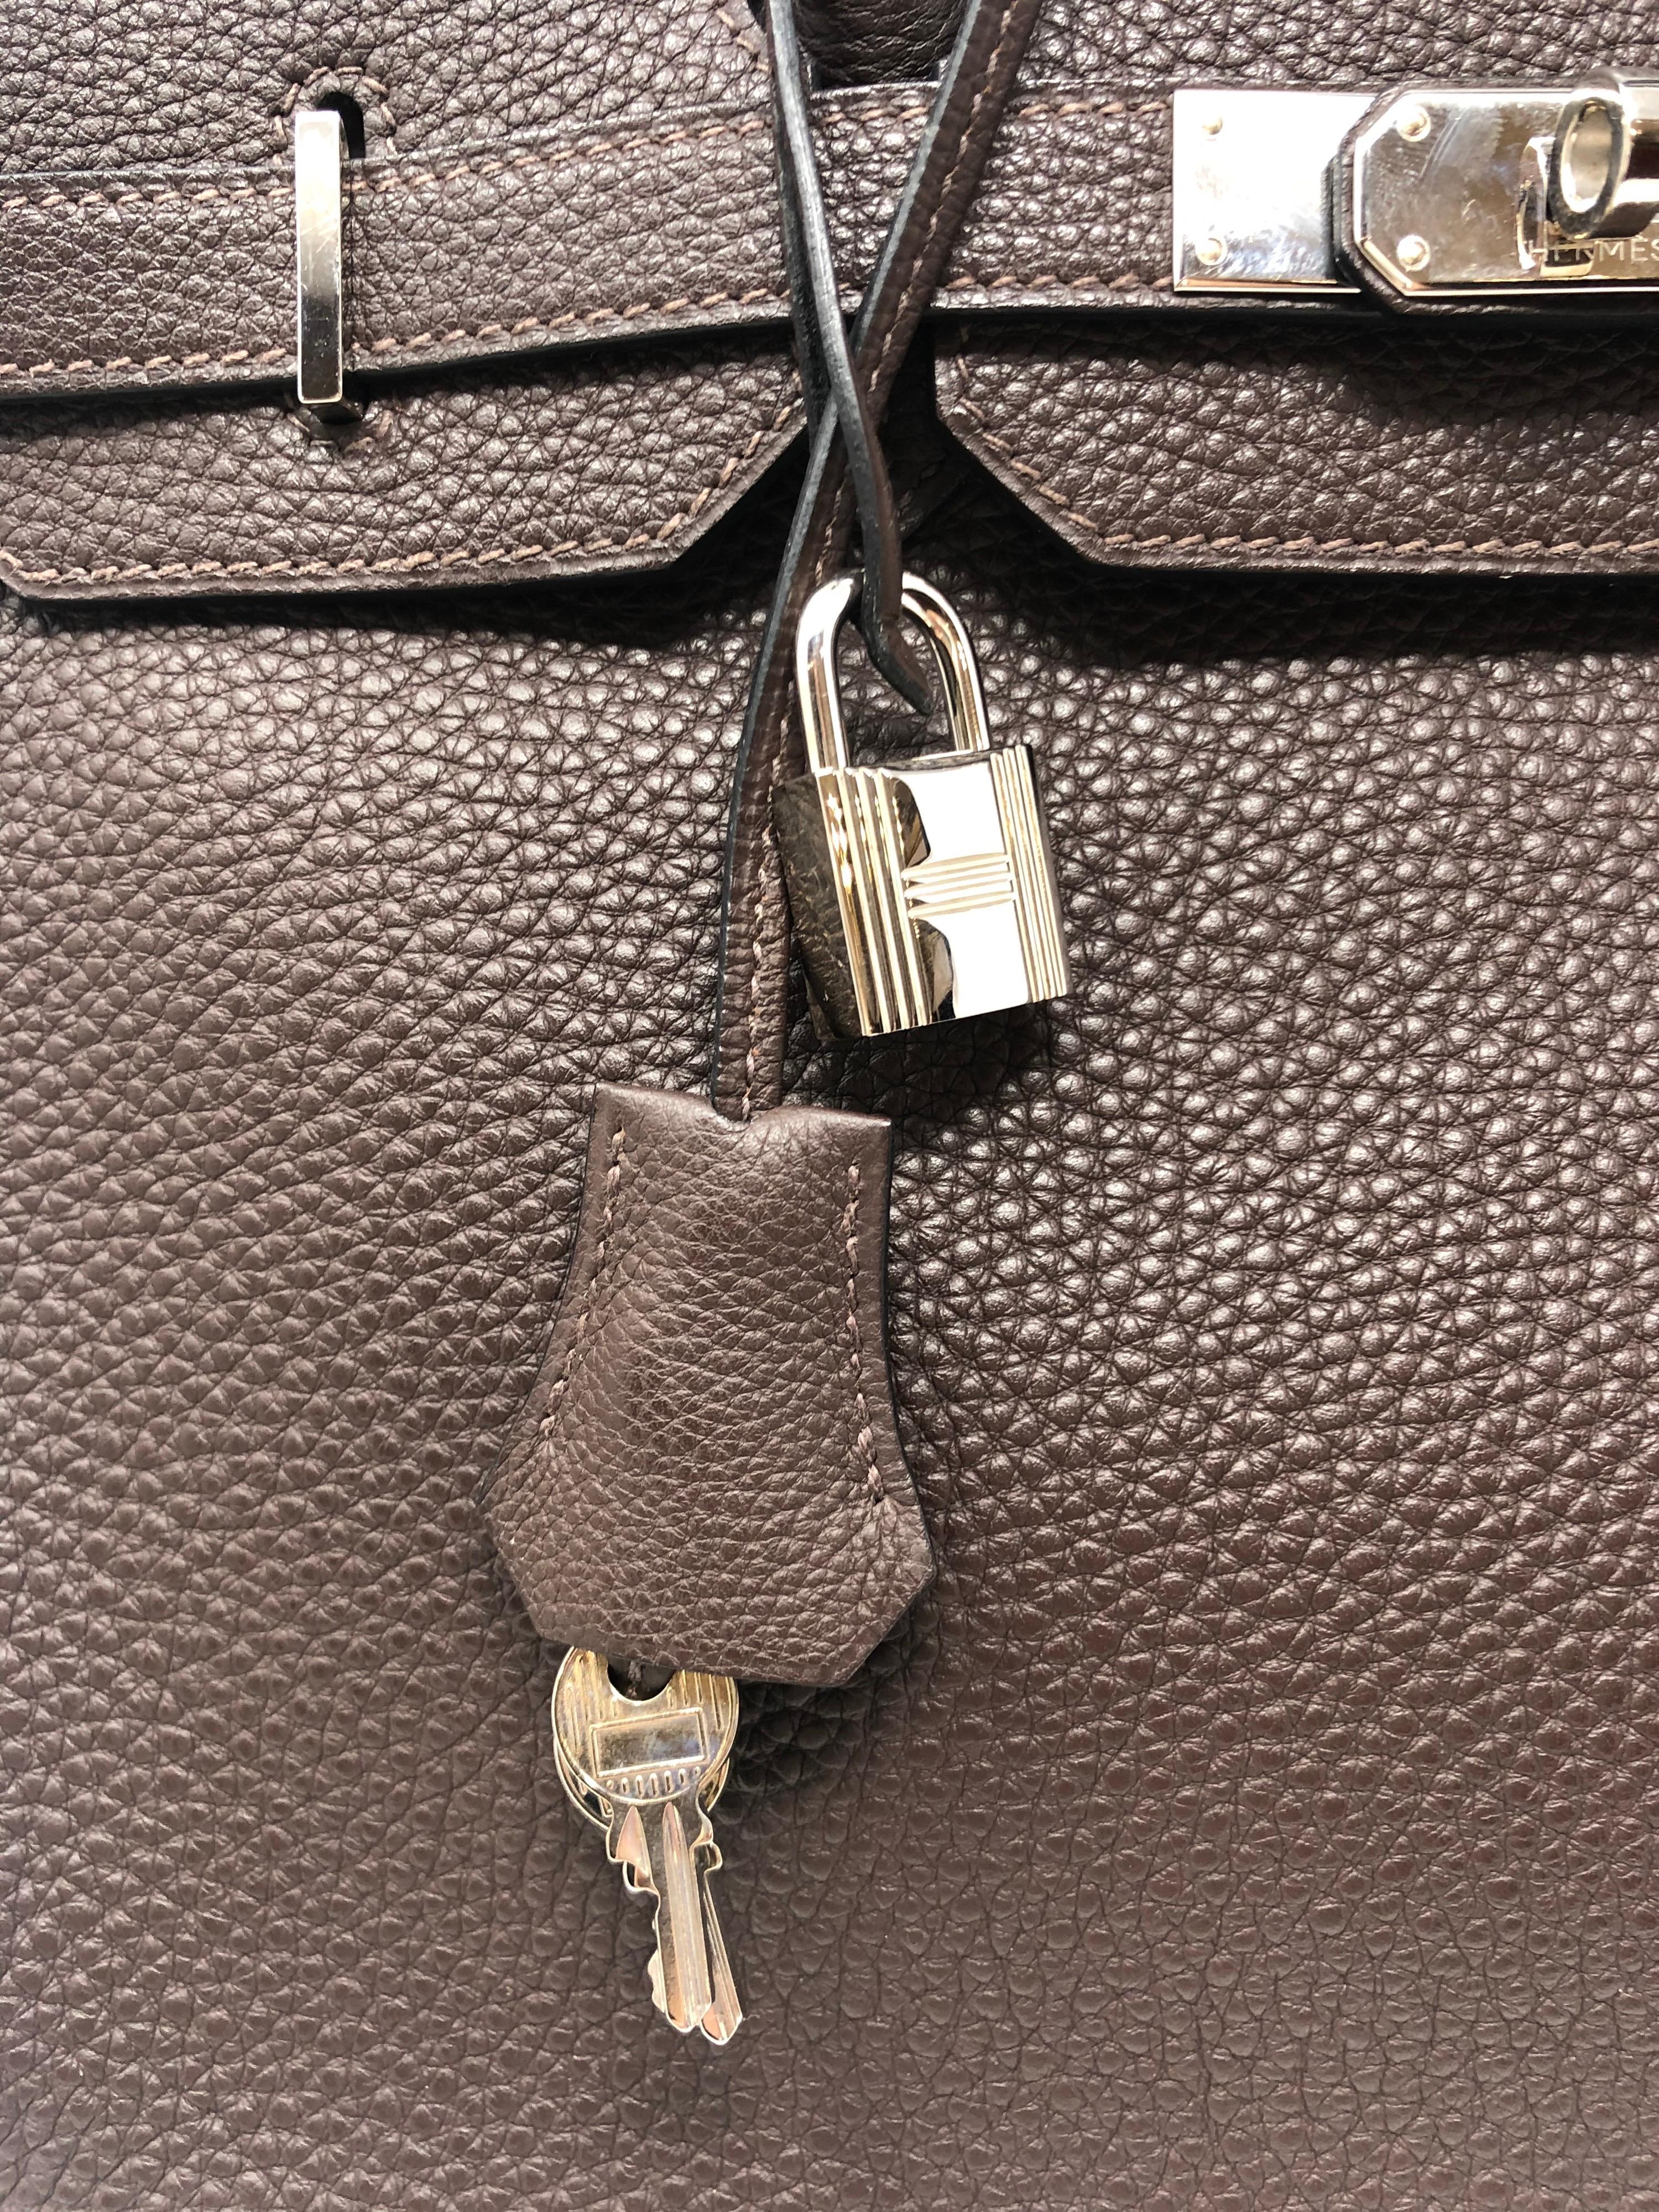 Hermes Dark Brown Birkin 30 with Palladium hardware. Rare size and most wanted. Excellent like new condition. Plastic still on hardware. Togo leather. Includes lock, keys, clochette, and dust cover. Guaranteed authentic. 